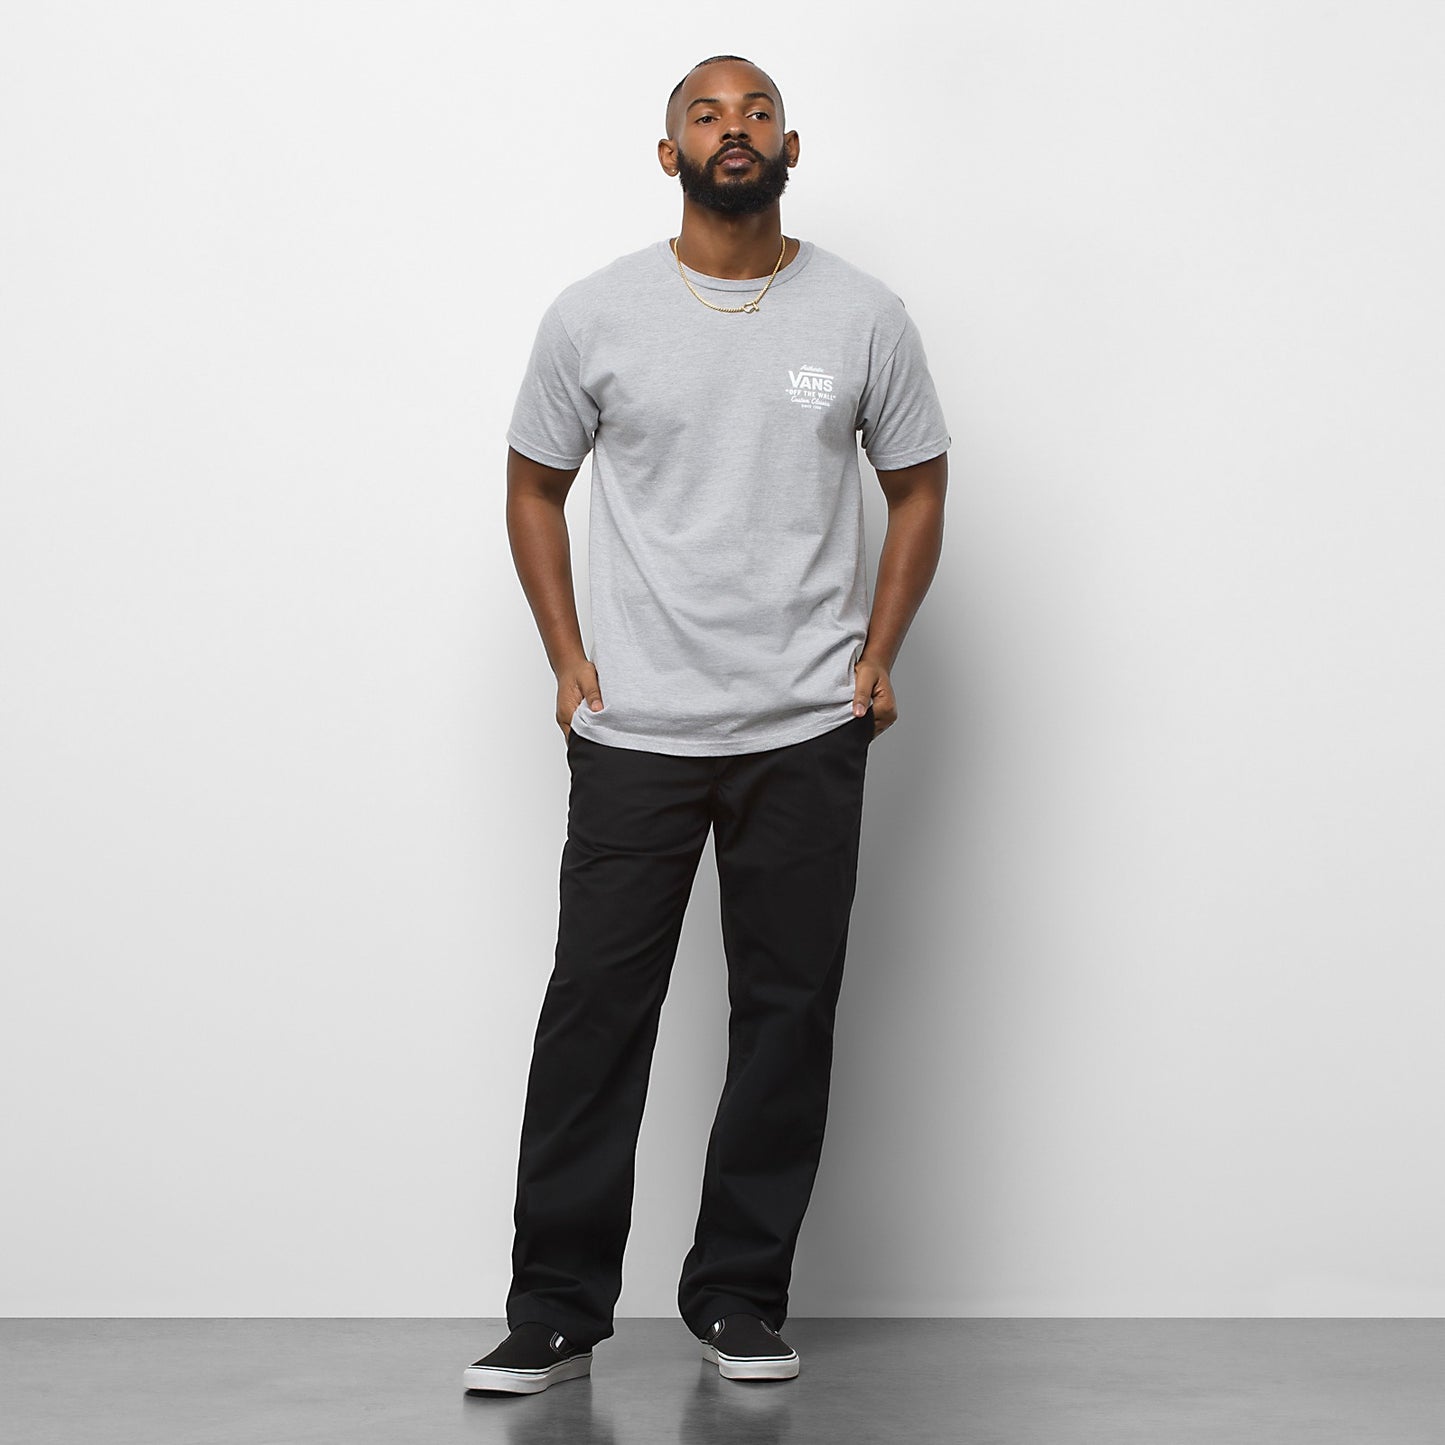 Vans Authentic Chino Relaxed Pant